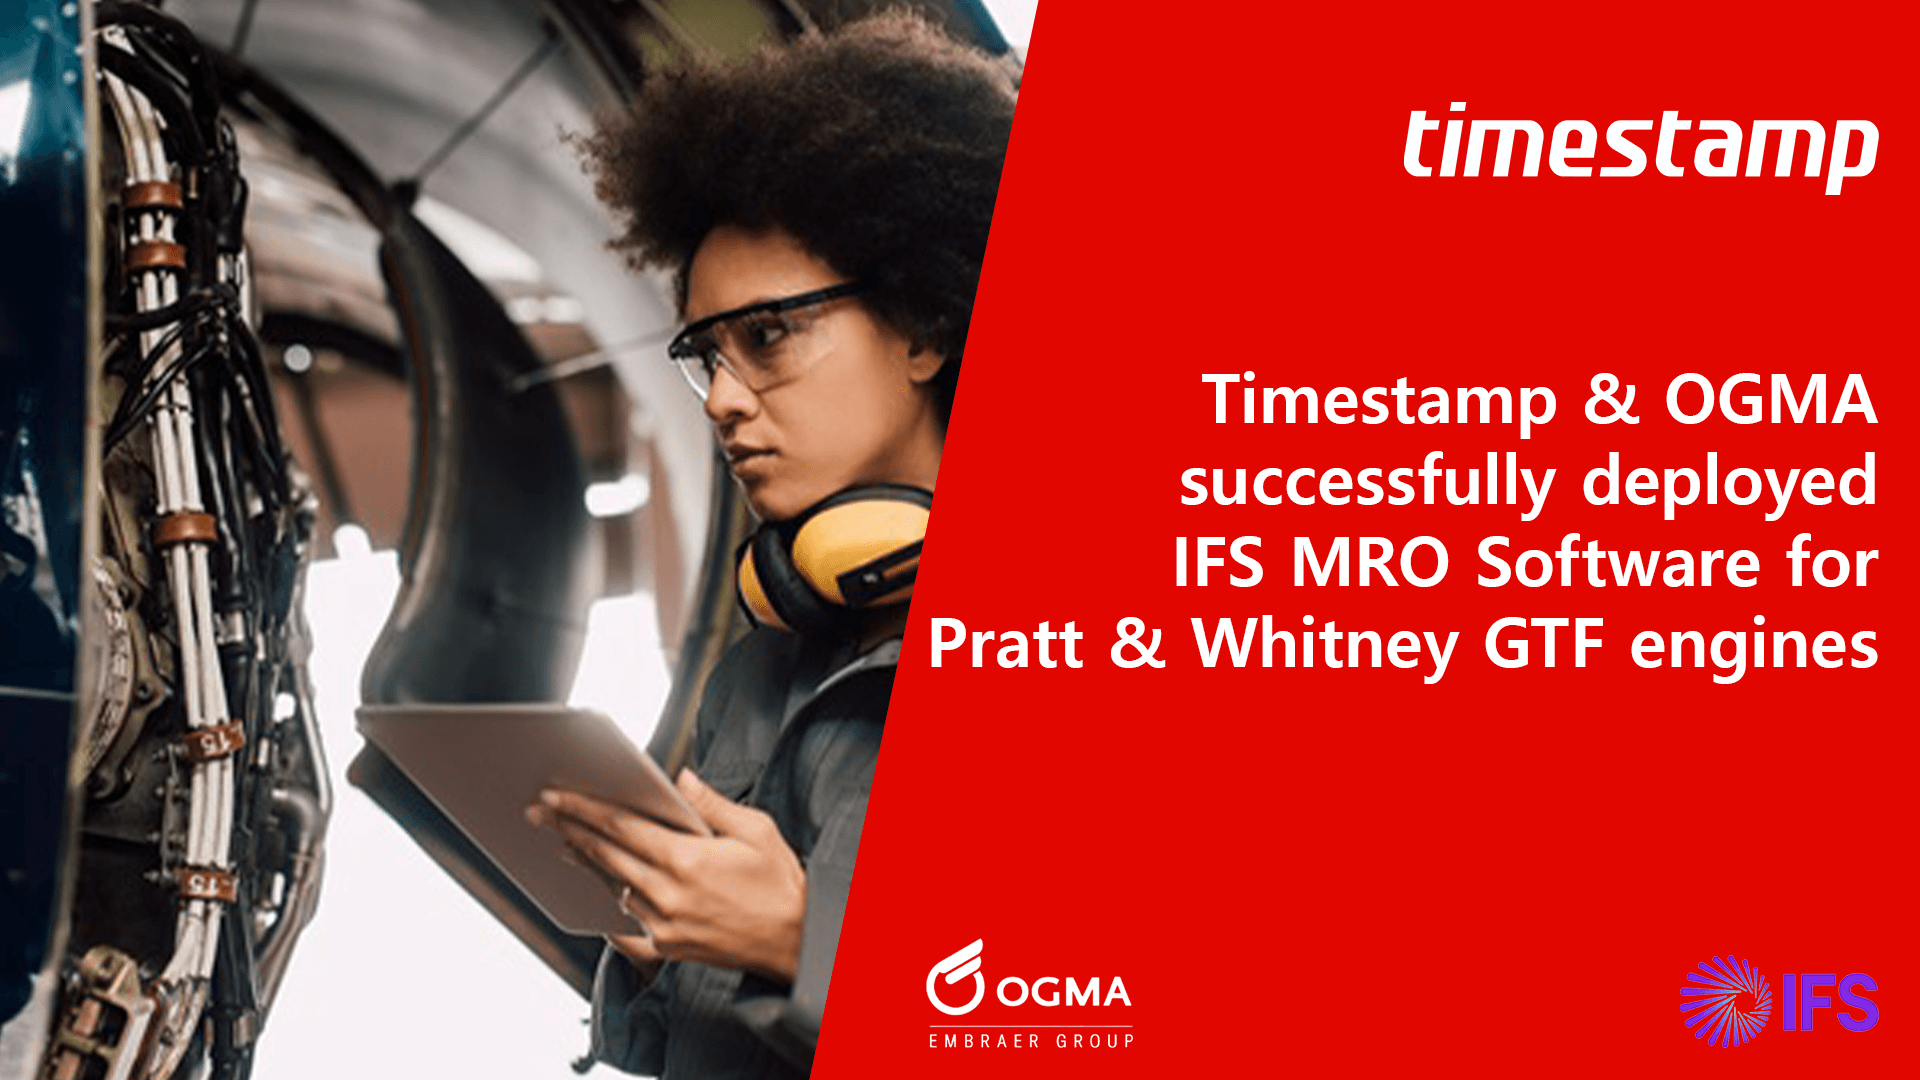 Timestamp Successfully Implements IFS MRO Software at OGMA for Pratt & Whitney GTF Engines Maintenance